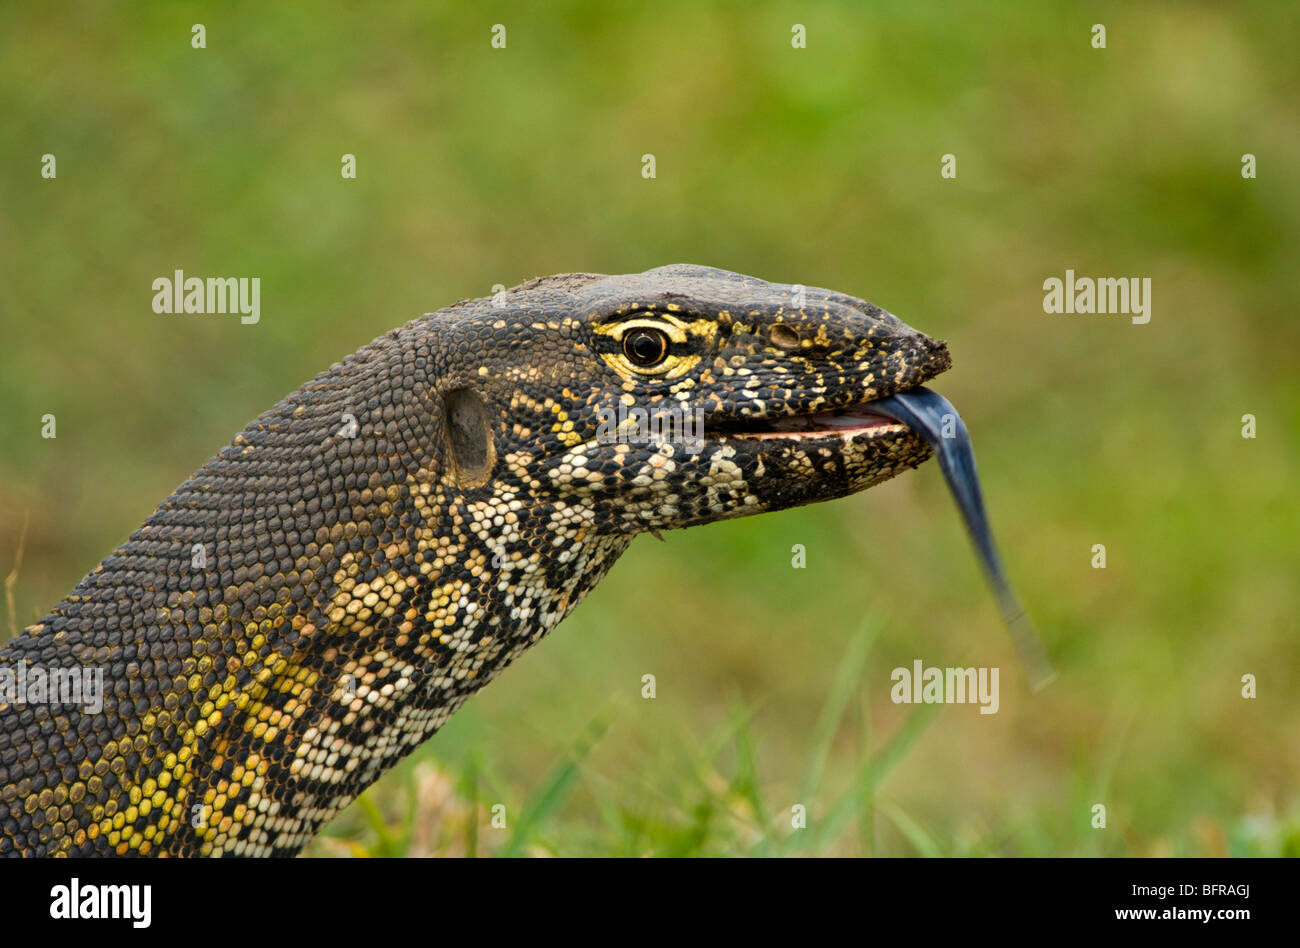 A Nile Monitor tests the air with its tongue Stock Photo